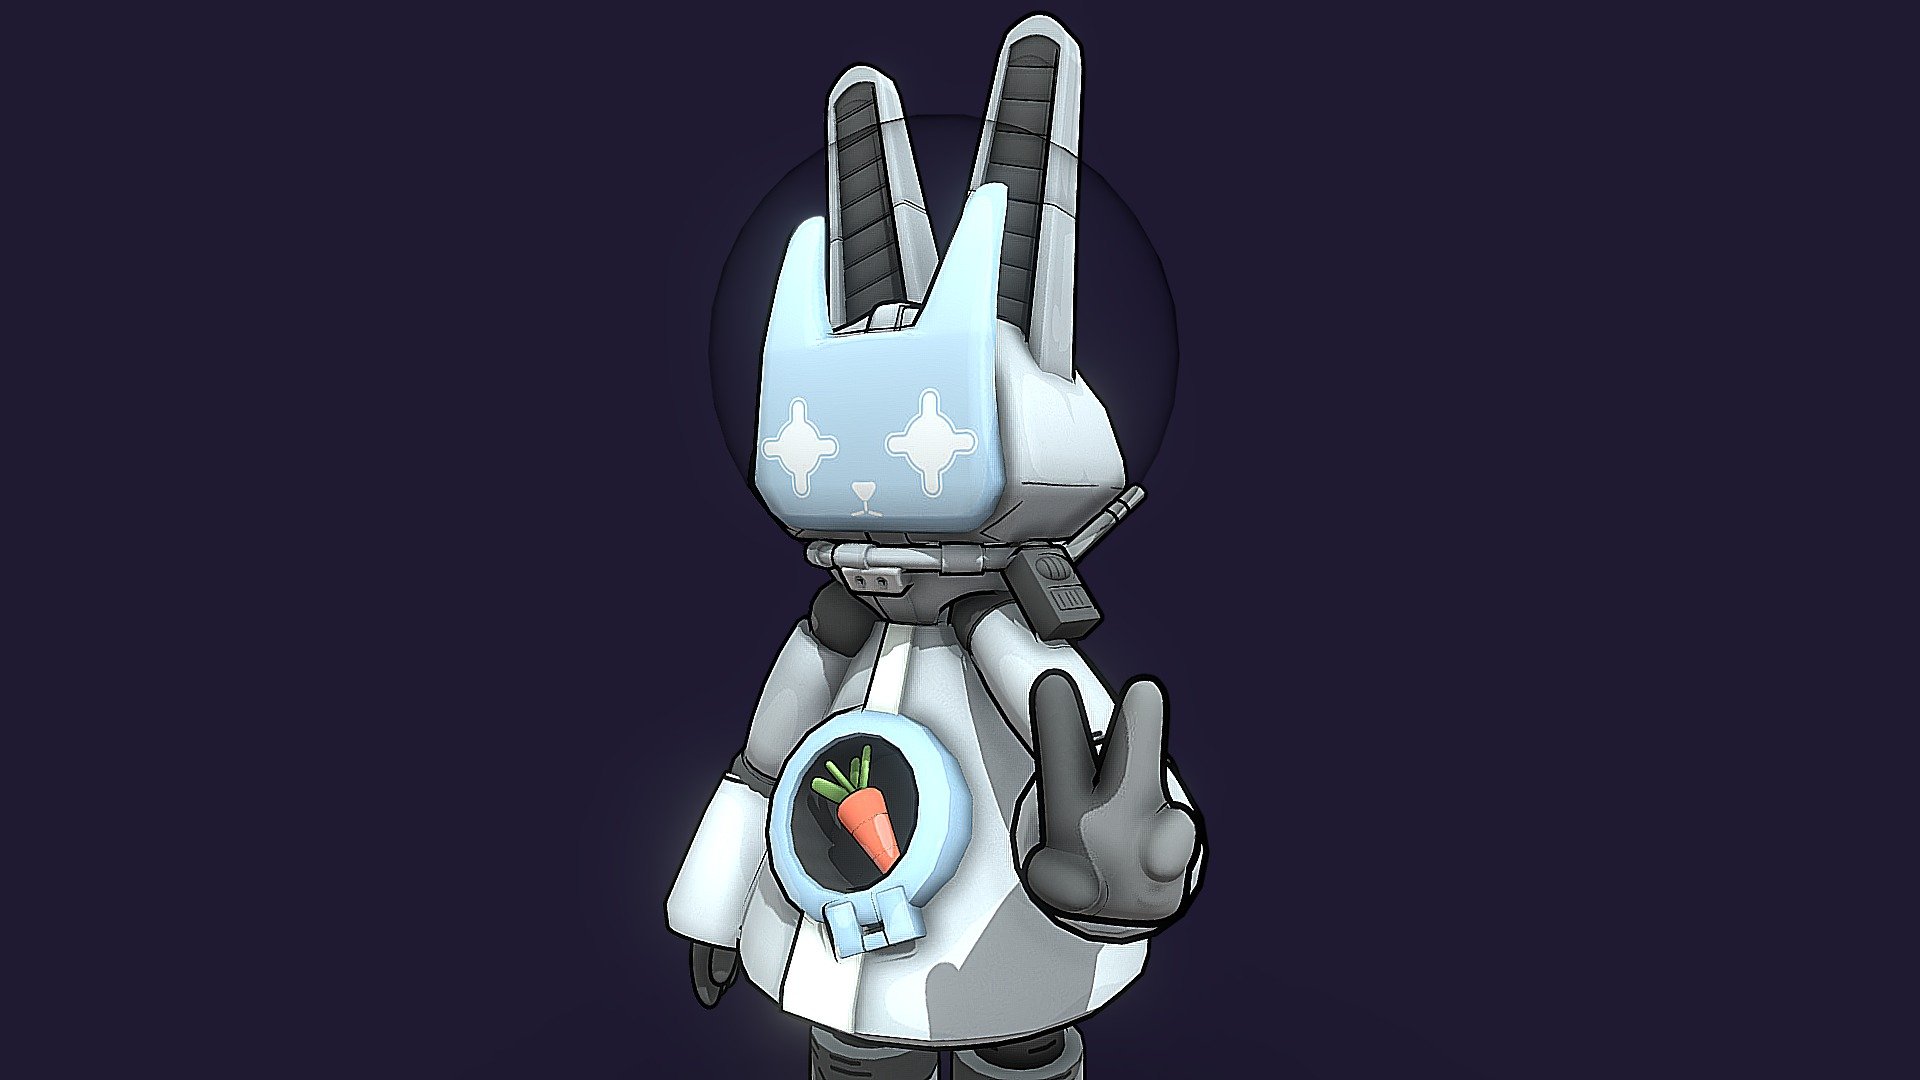 Inspired by one of the designs of lordyanyu
https://twitter.com/lordyanyu - Space Bunny - Download Free 3D model by Mora (@MoraAzul) 3d model